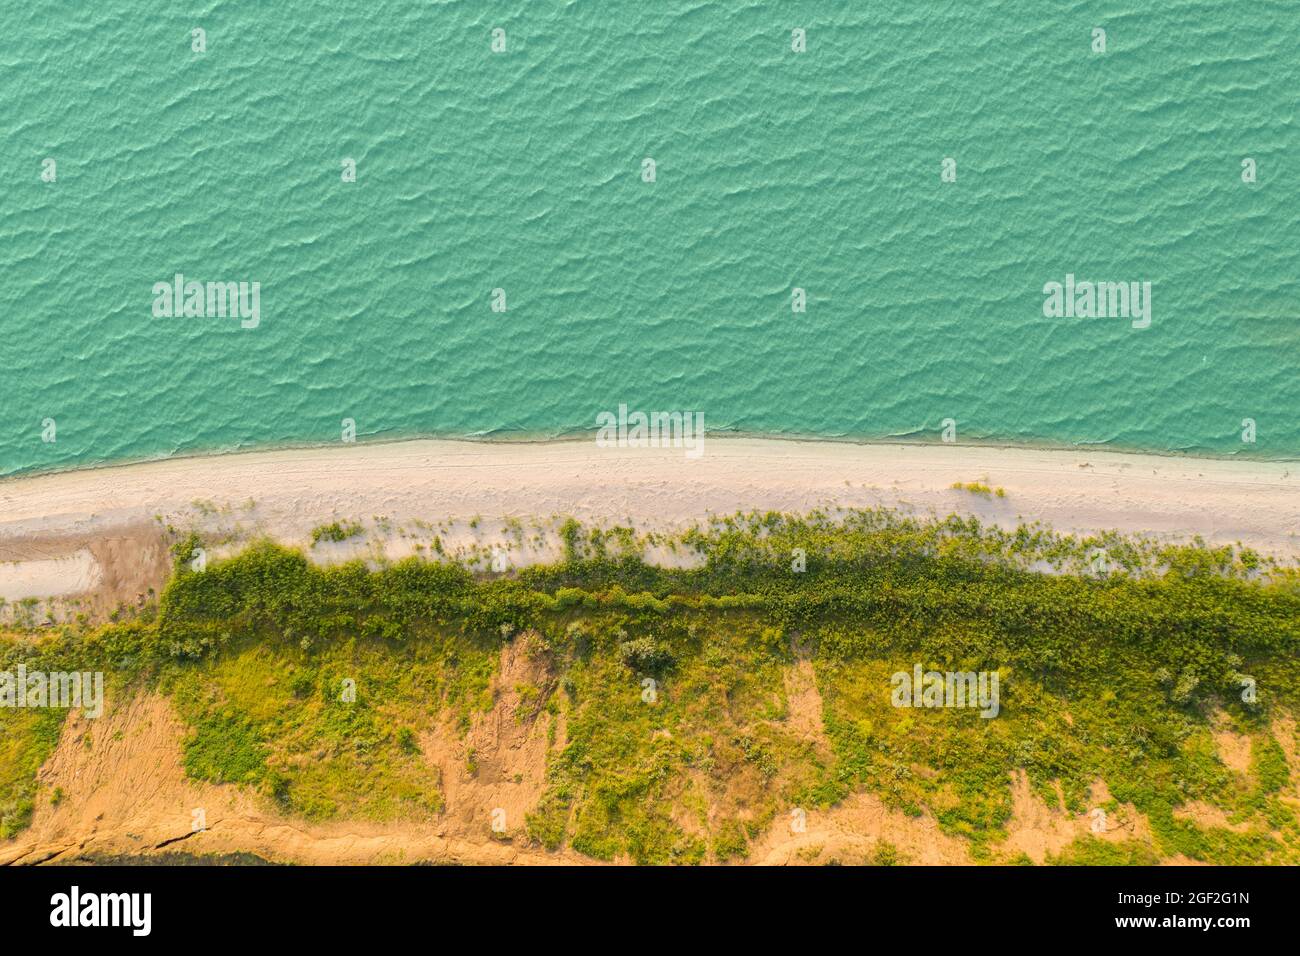 Sea coast. Aerial view of the beach and waves Stock Photo